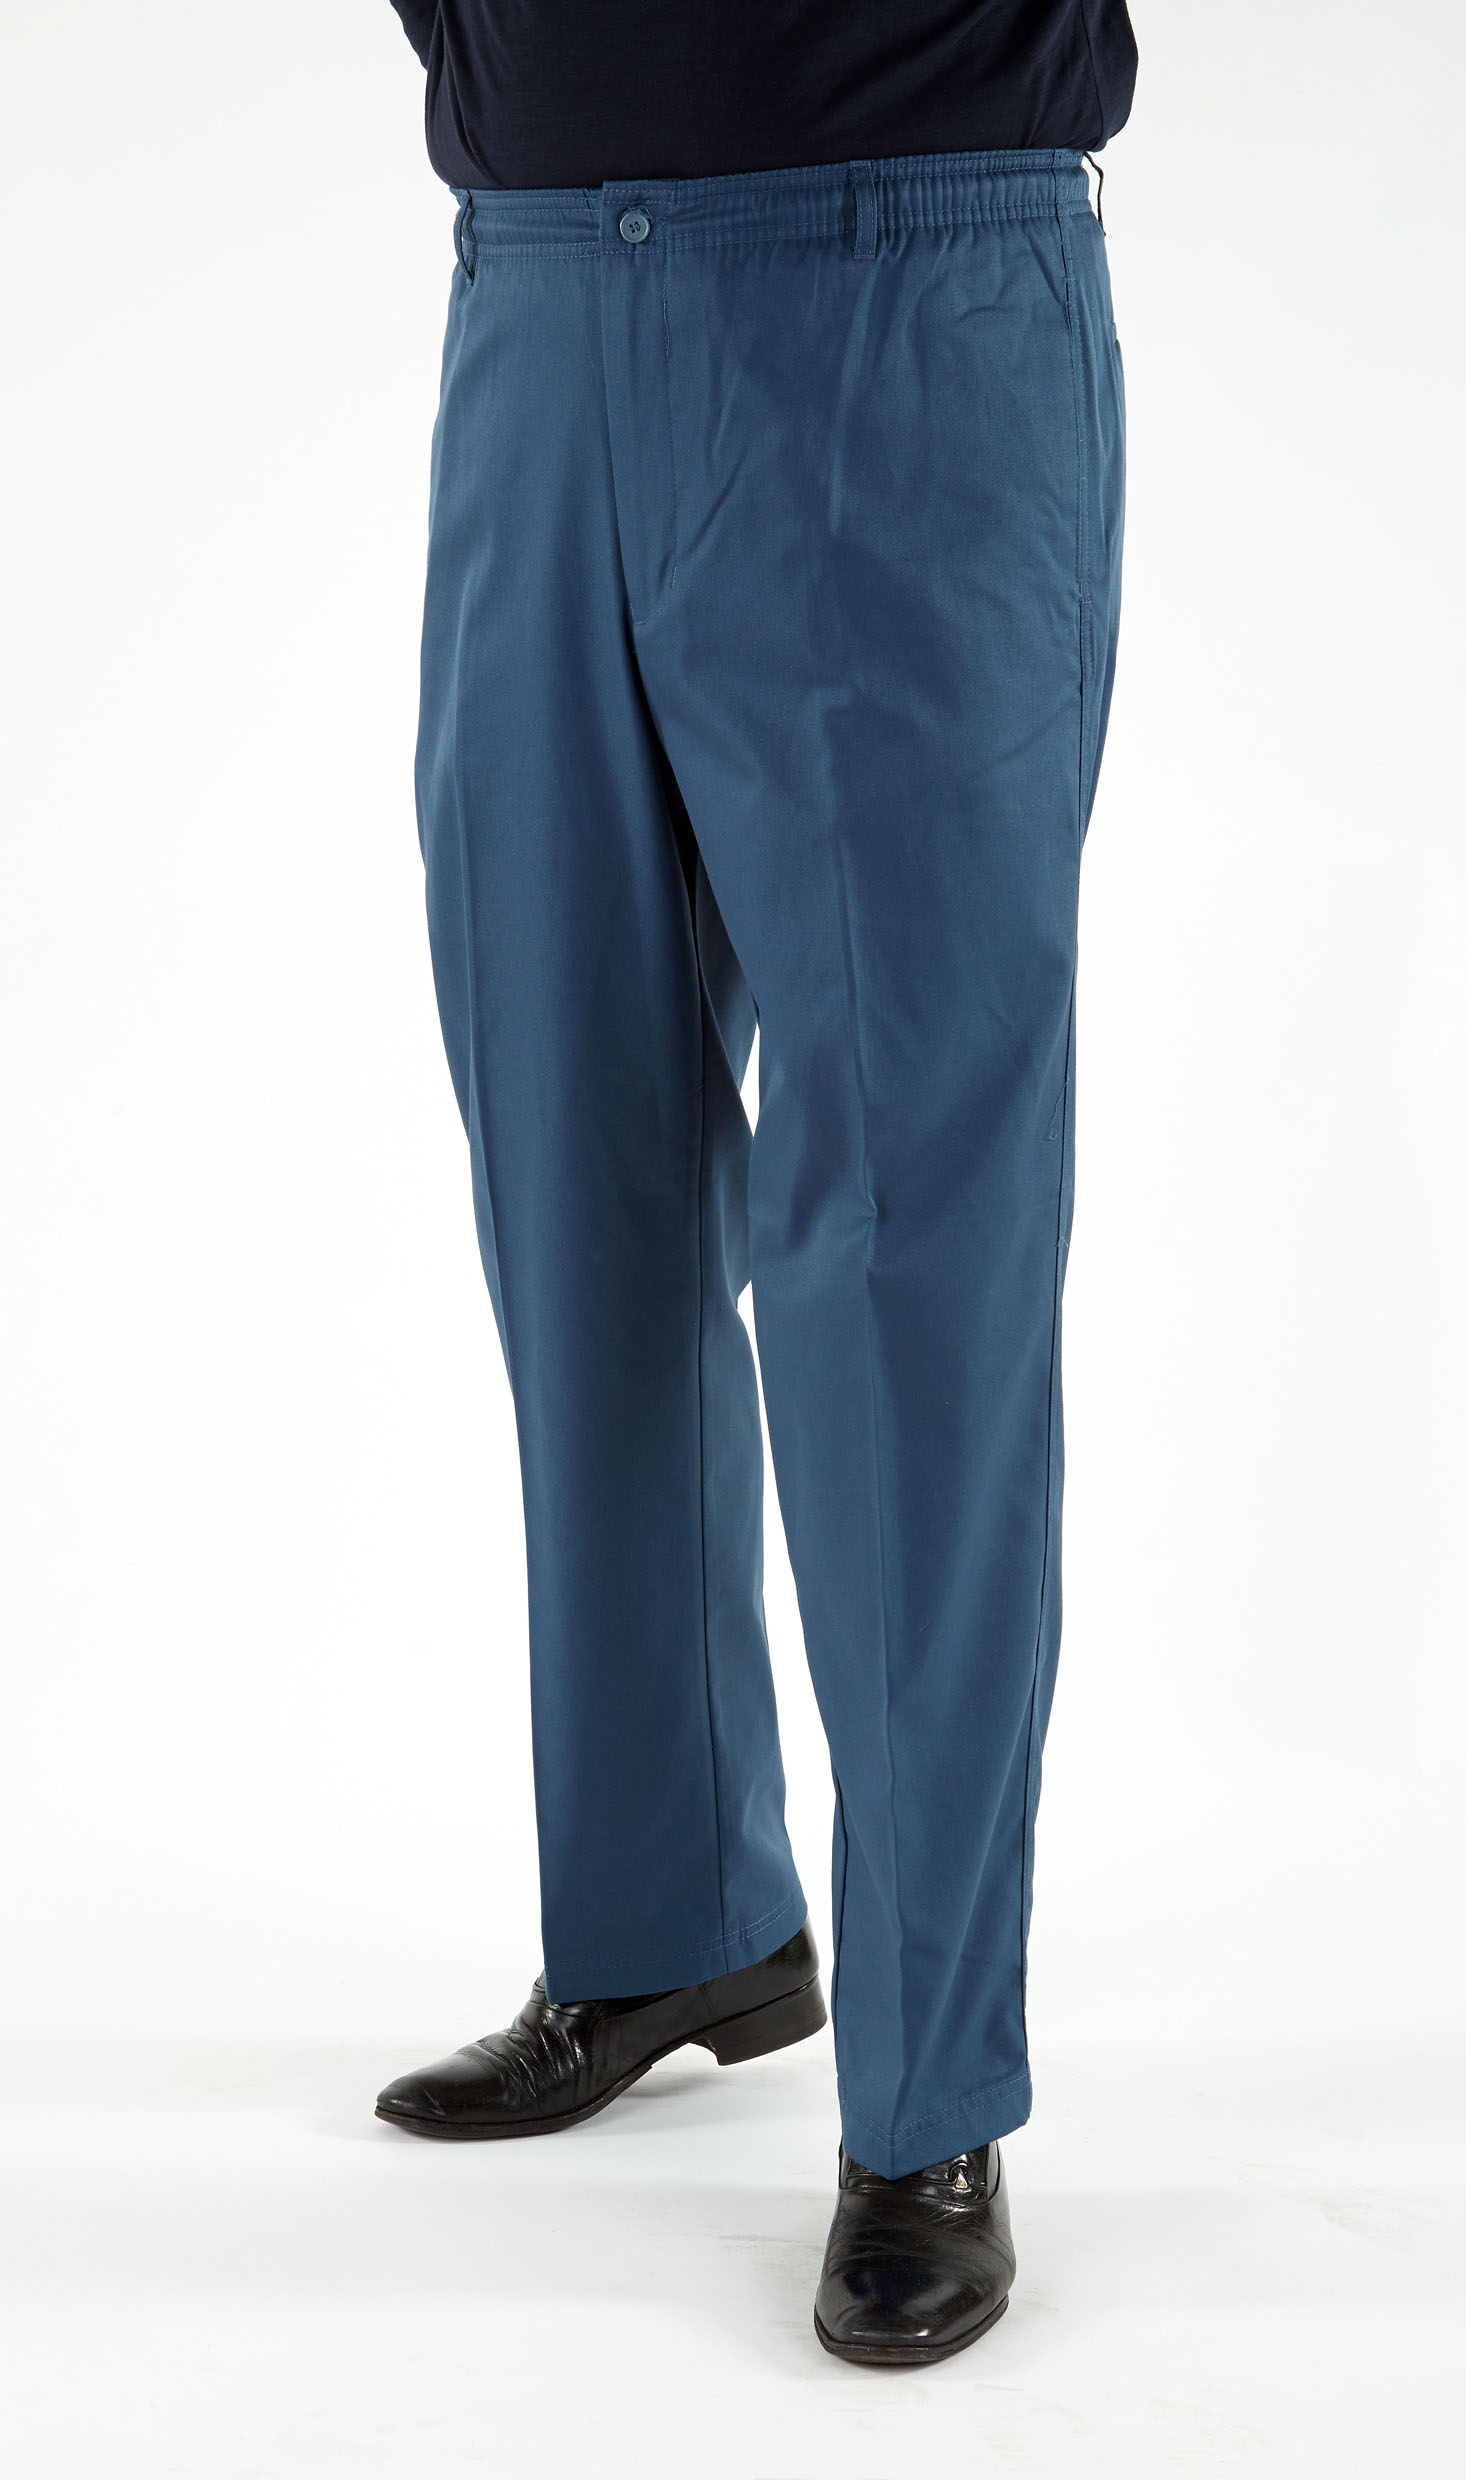 Mens Fully Elasticated Waist Trousers, Button or Velcro Fastening